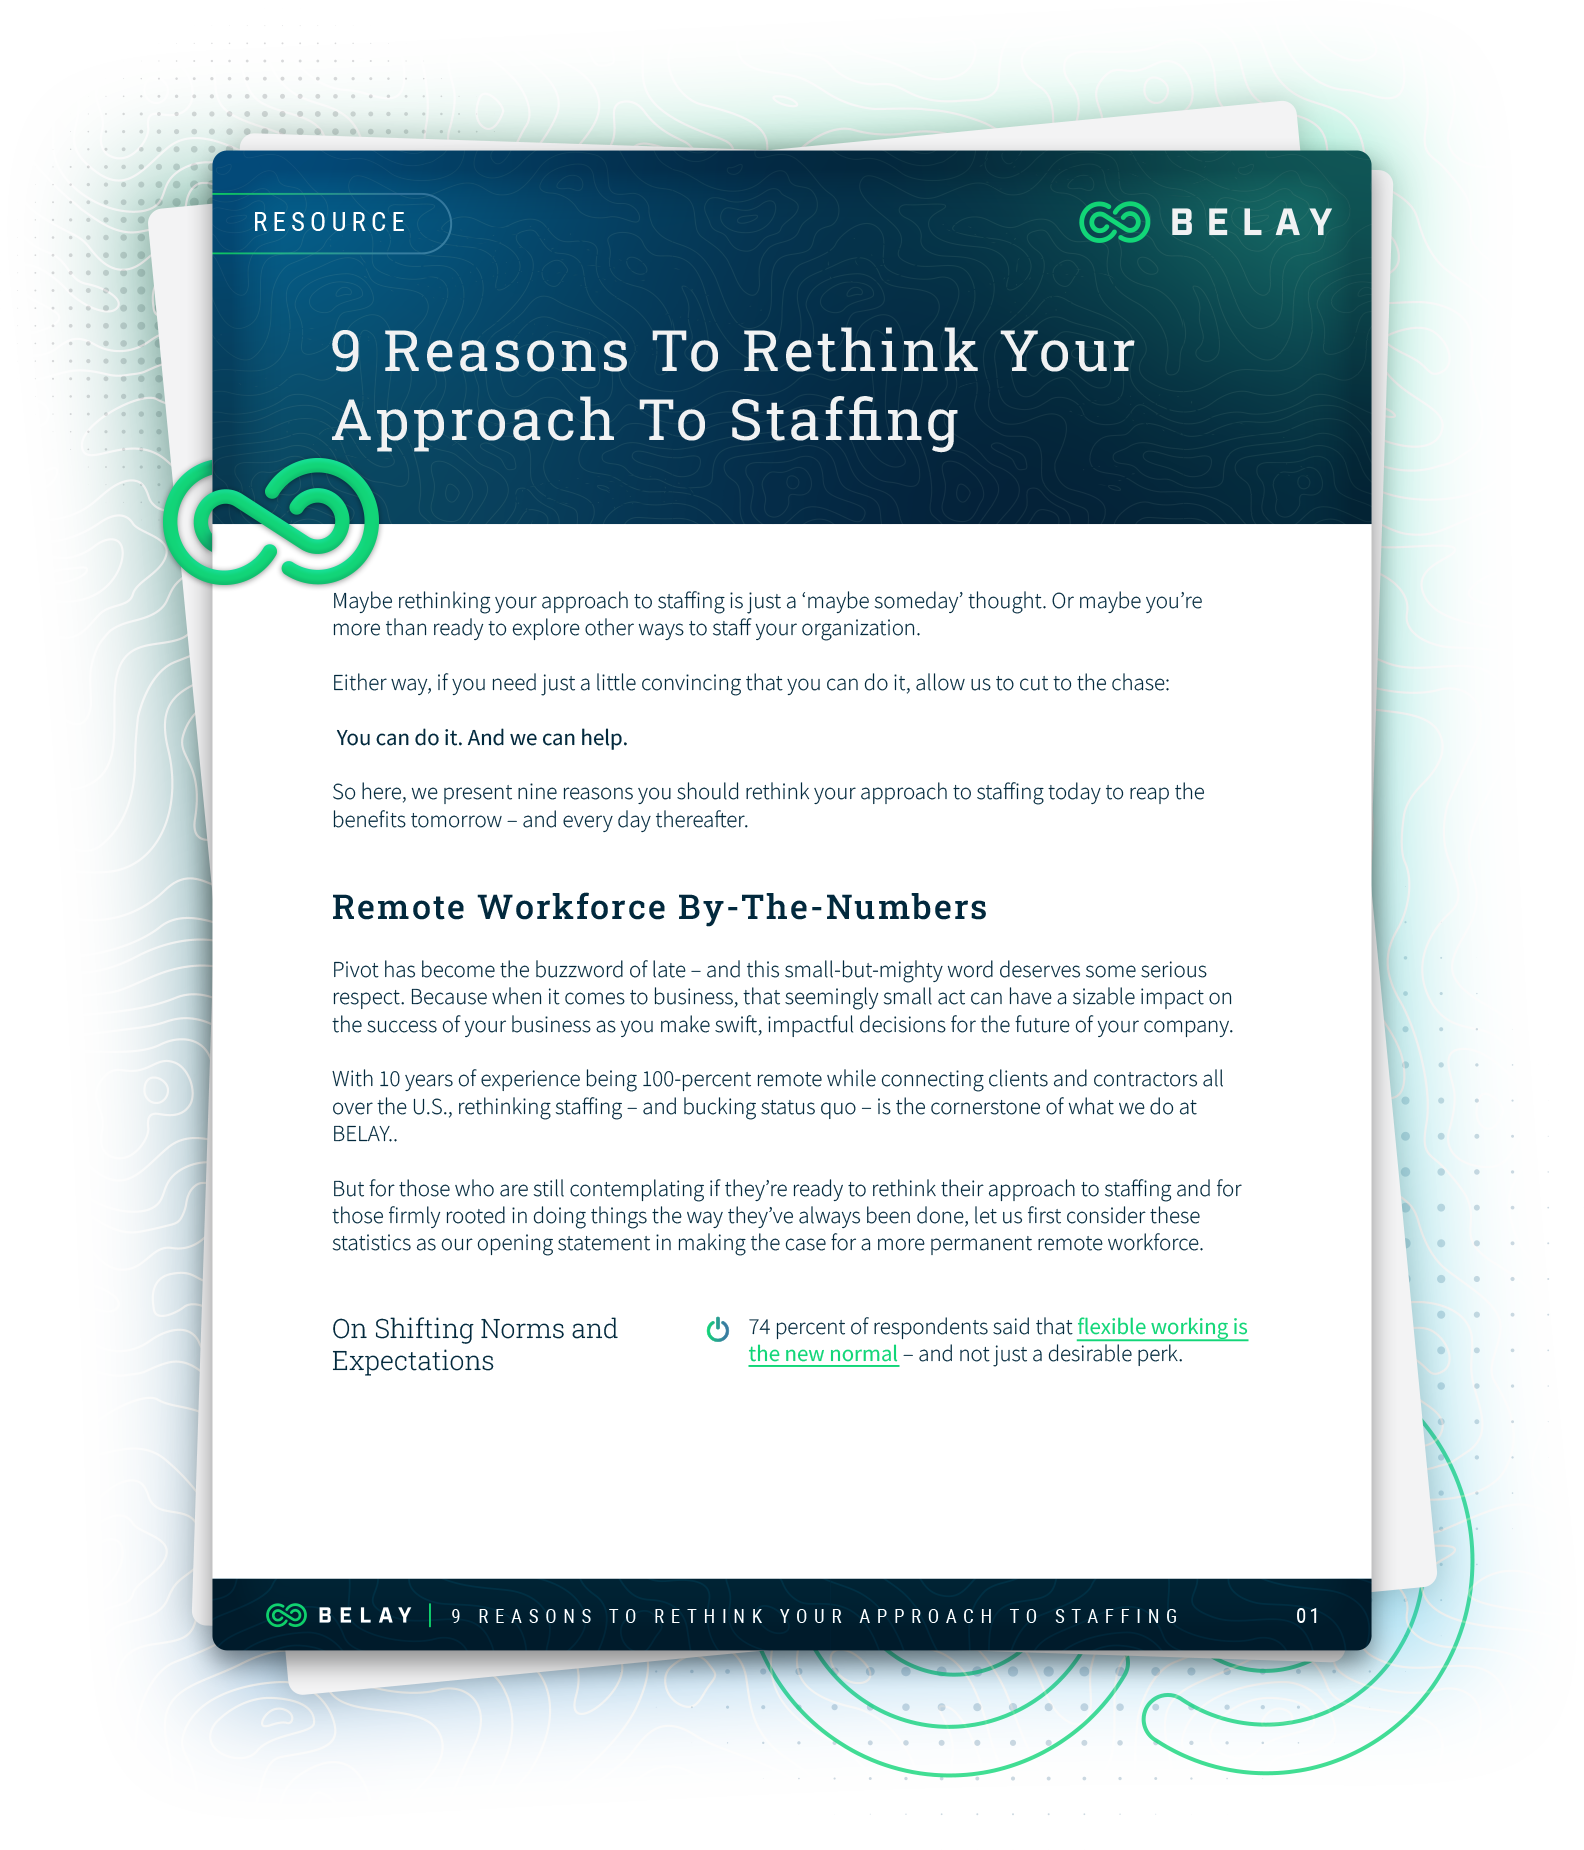 9 Reasons To Rethink Your Approach To Staffing